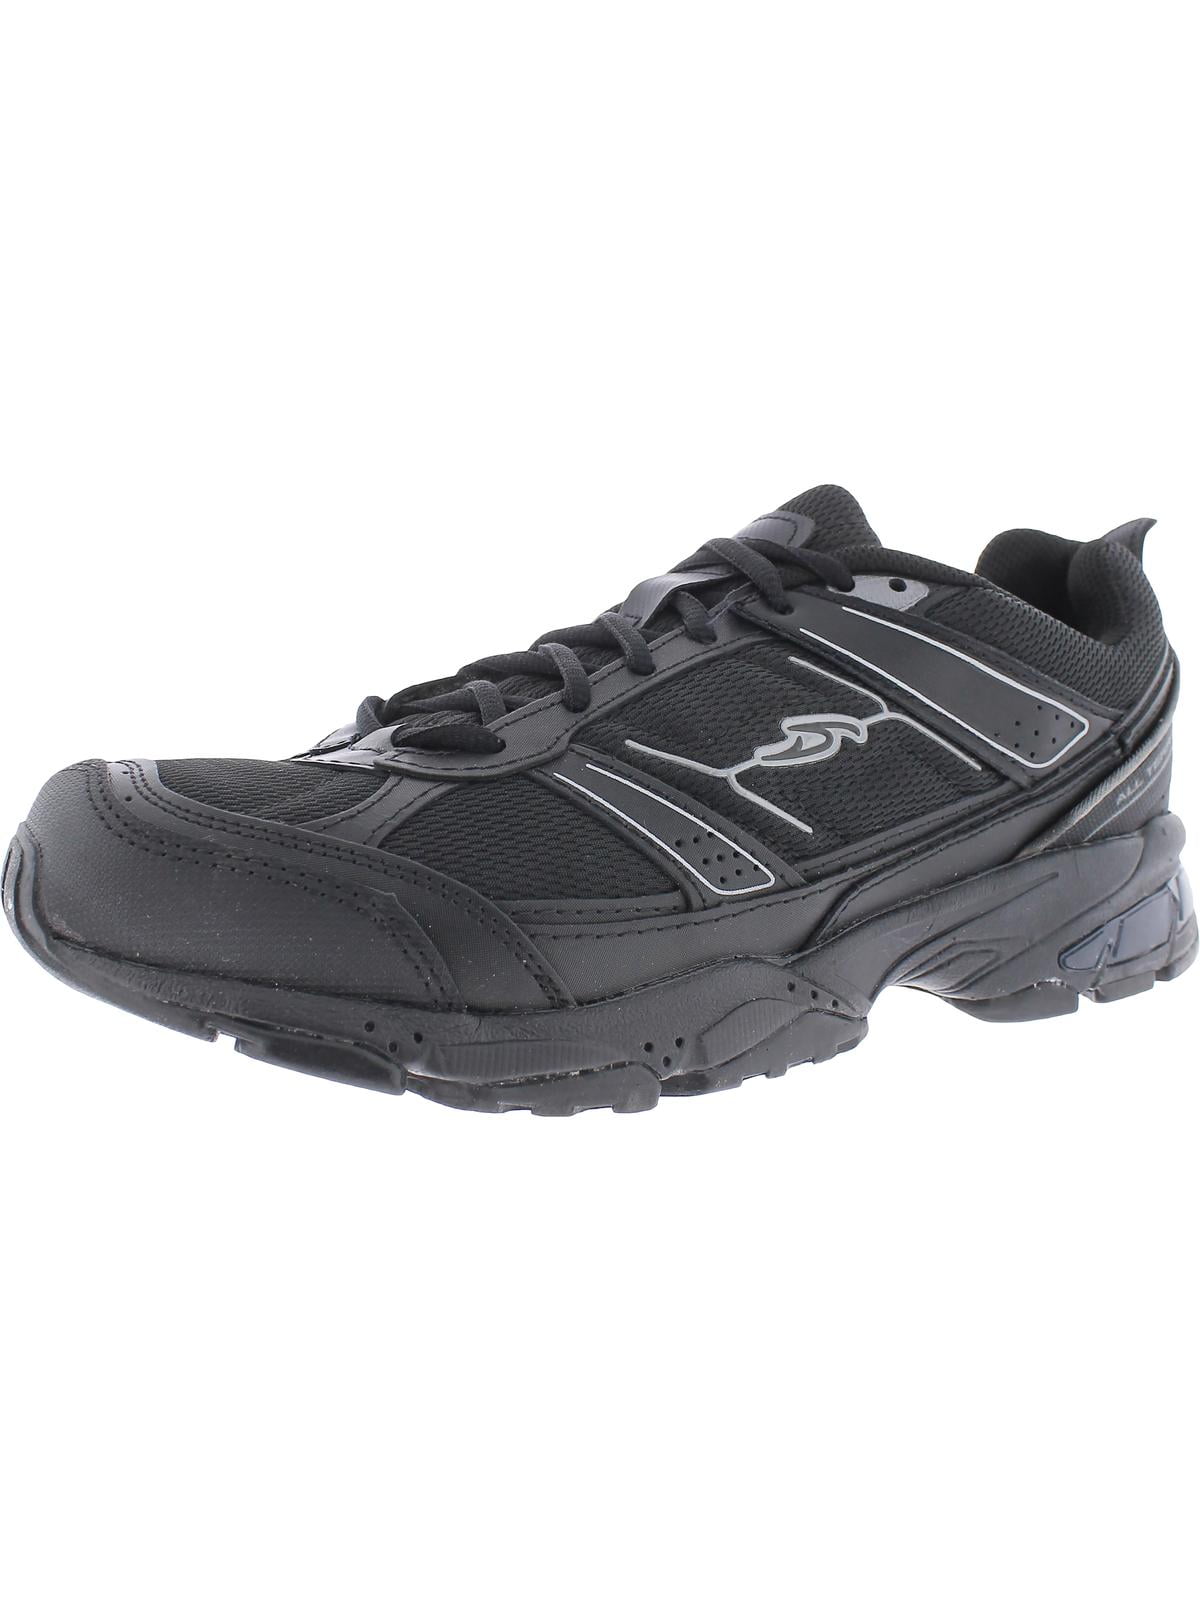 Dr. Scholl's Mens MDS Tundra Leather Athletic Shoes Black 11.5 Wide (E ...